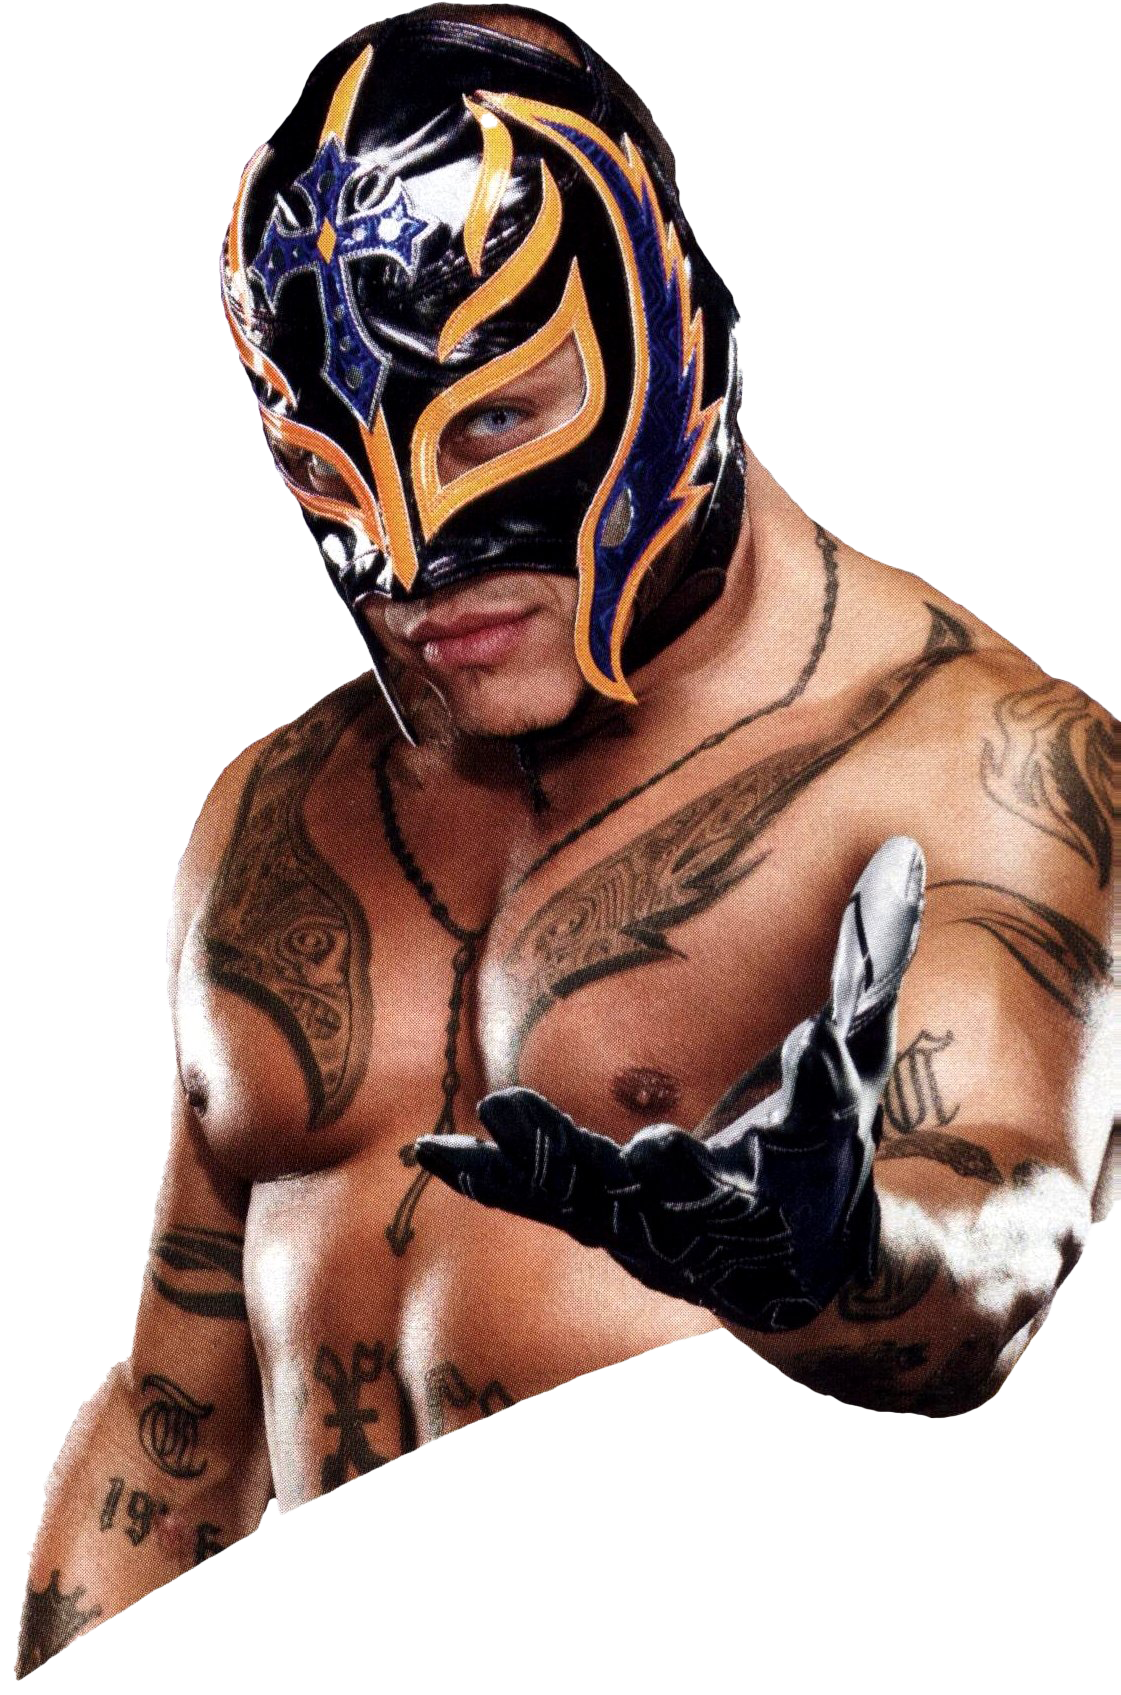 Rey Mysterio PNG Image HD